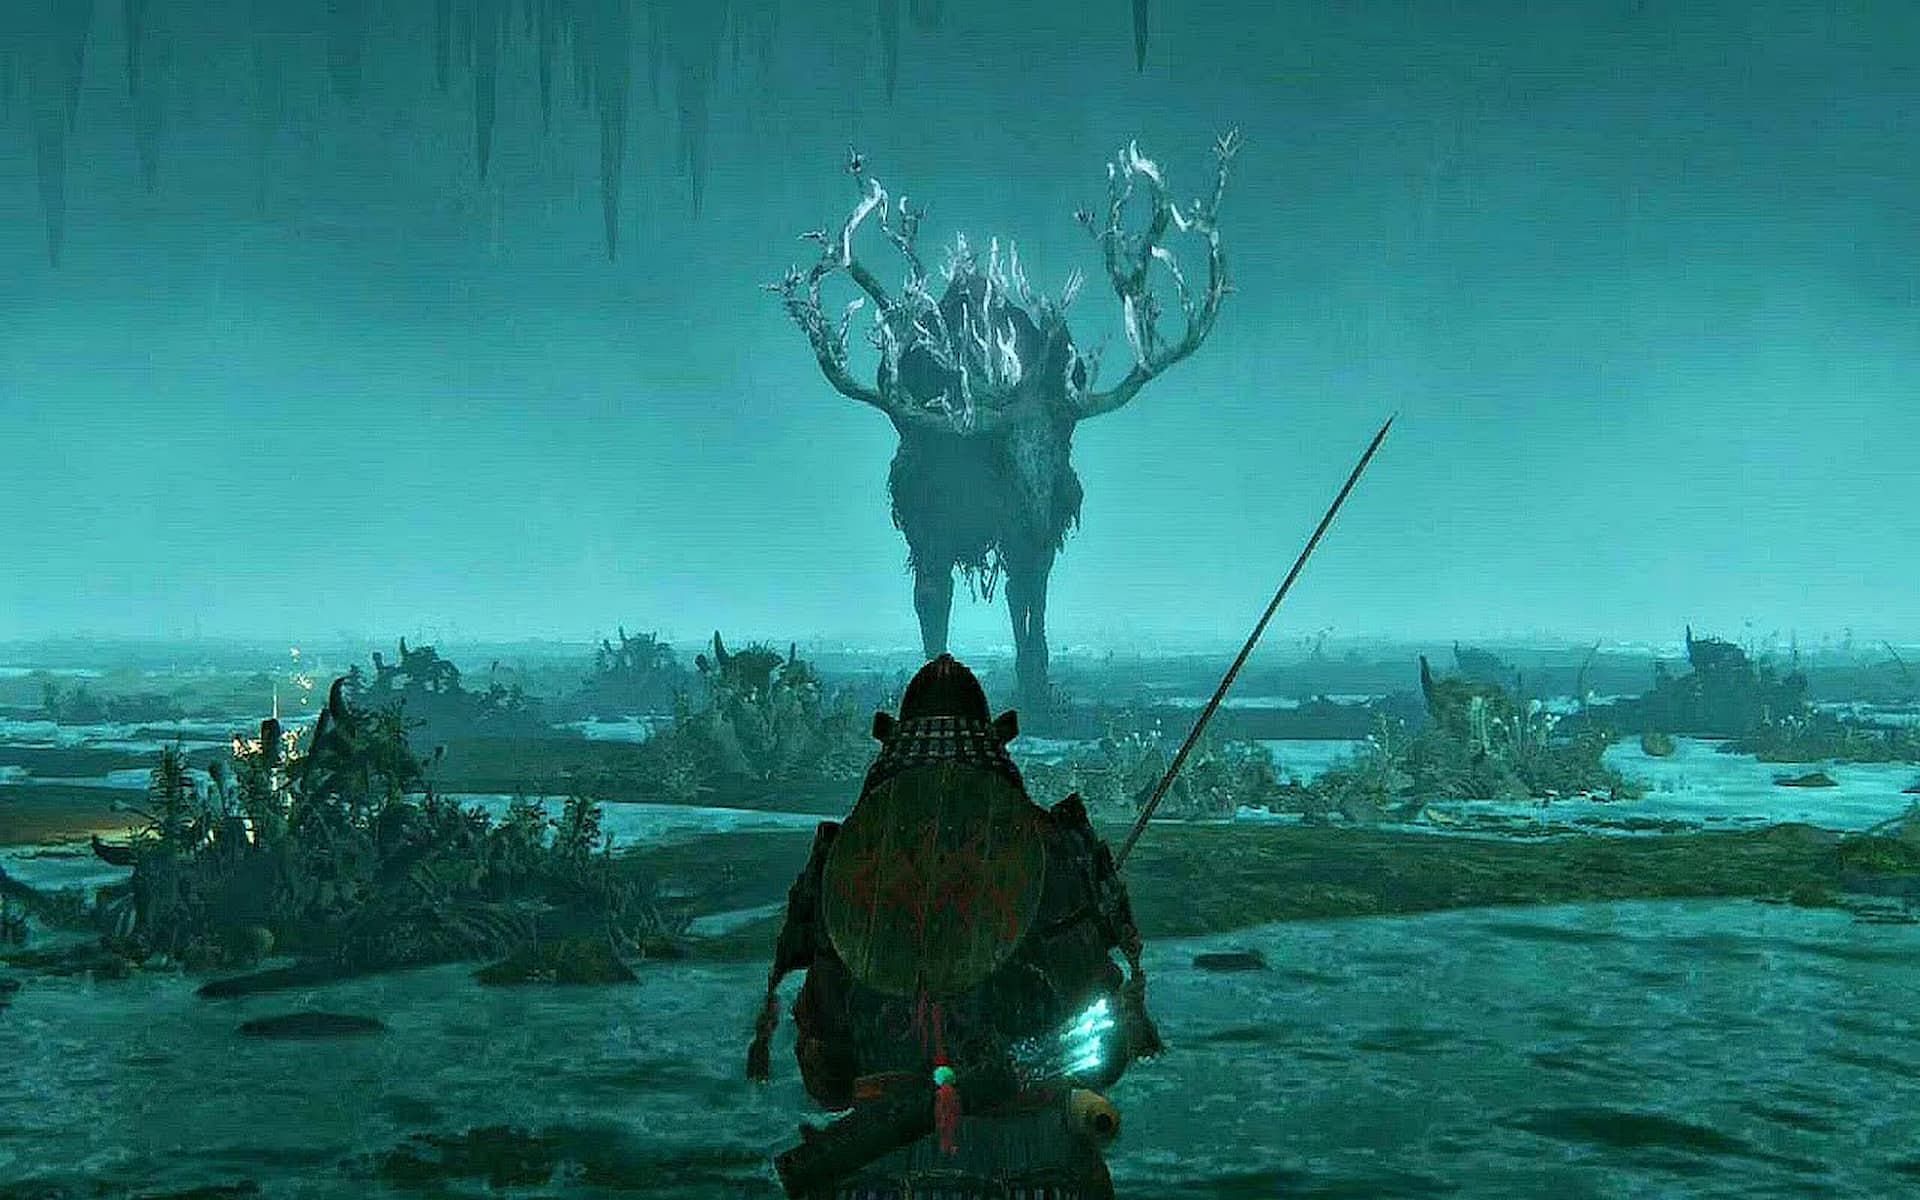 A player faces the deadly Ancestor Spirit boss in Elden Ring (Image via FromSoftware Inc.)